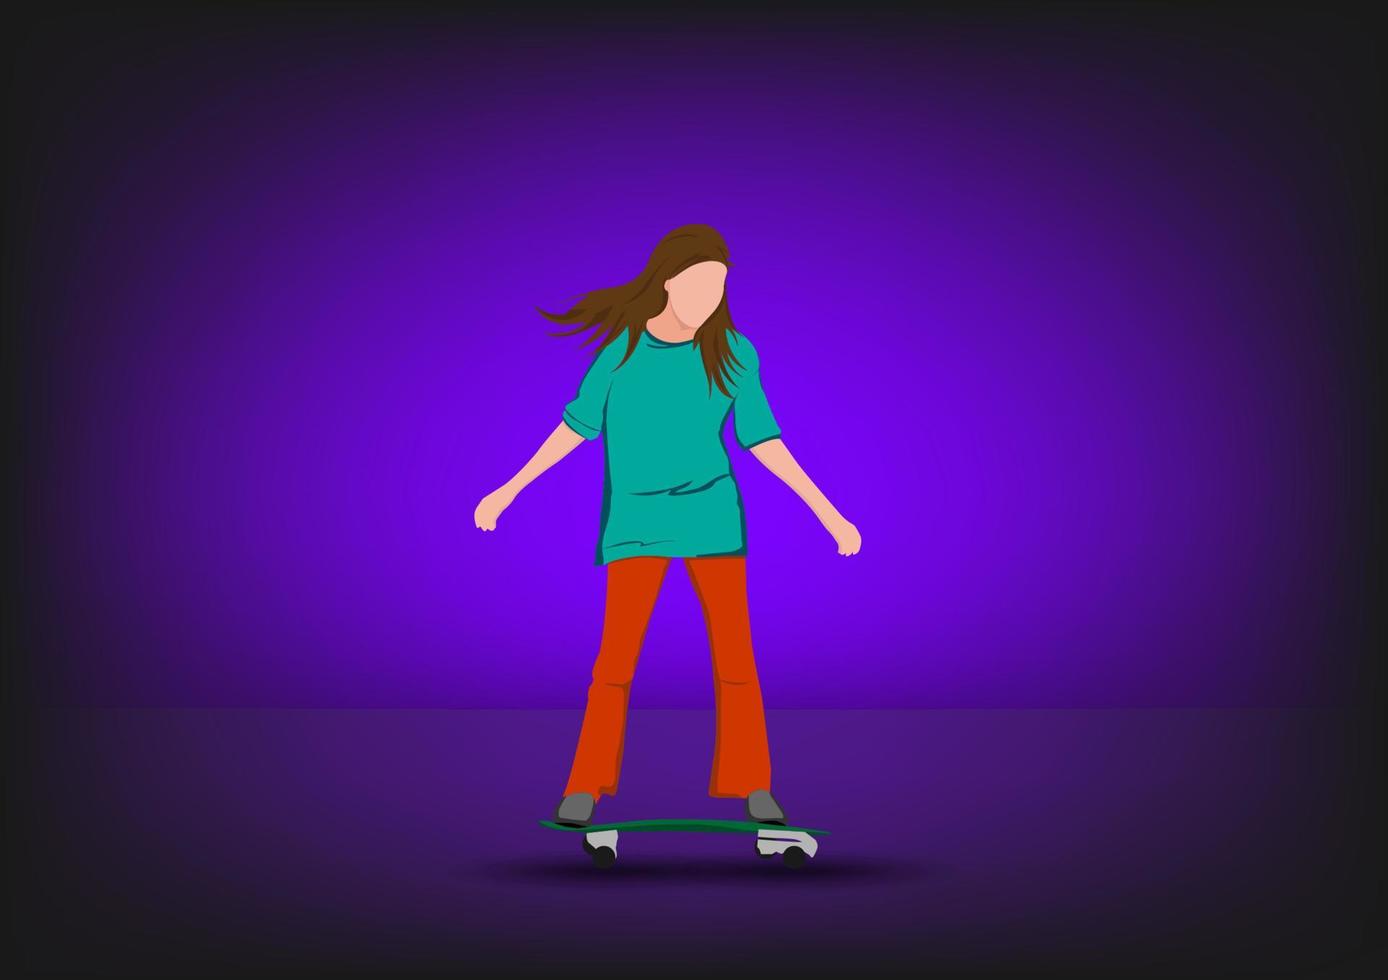 graphics image girl cartoon character riding a skateboard or surf skate standing purple background vector illustration